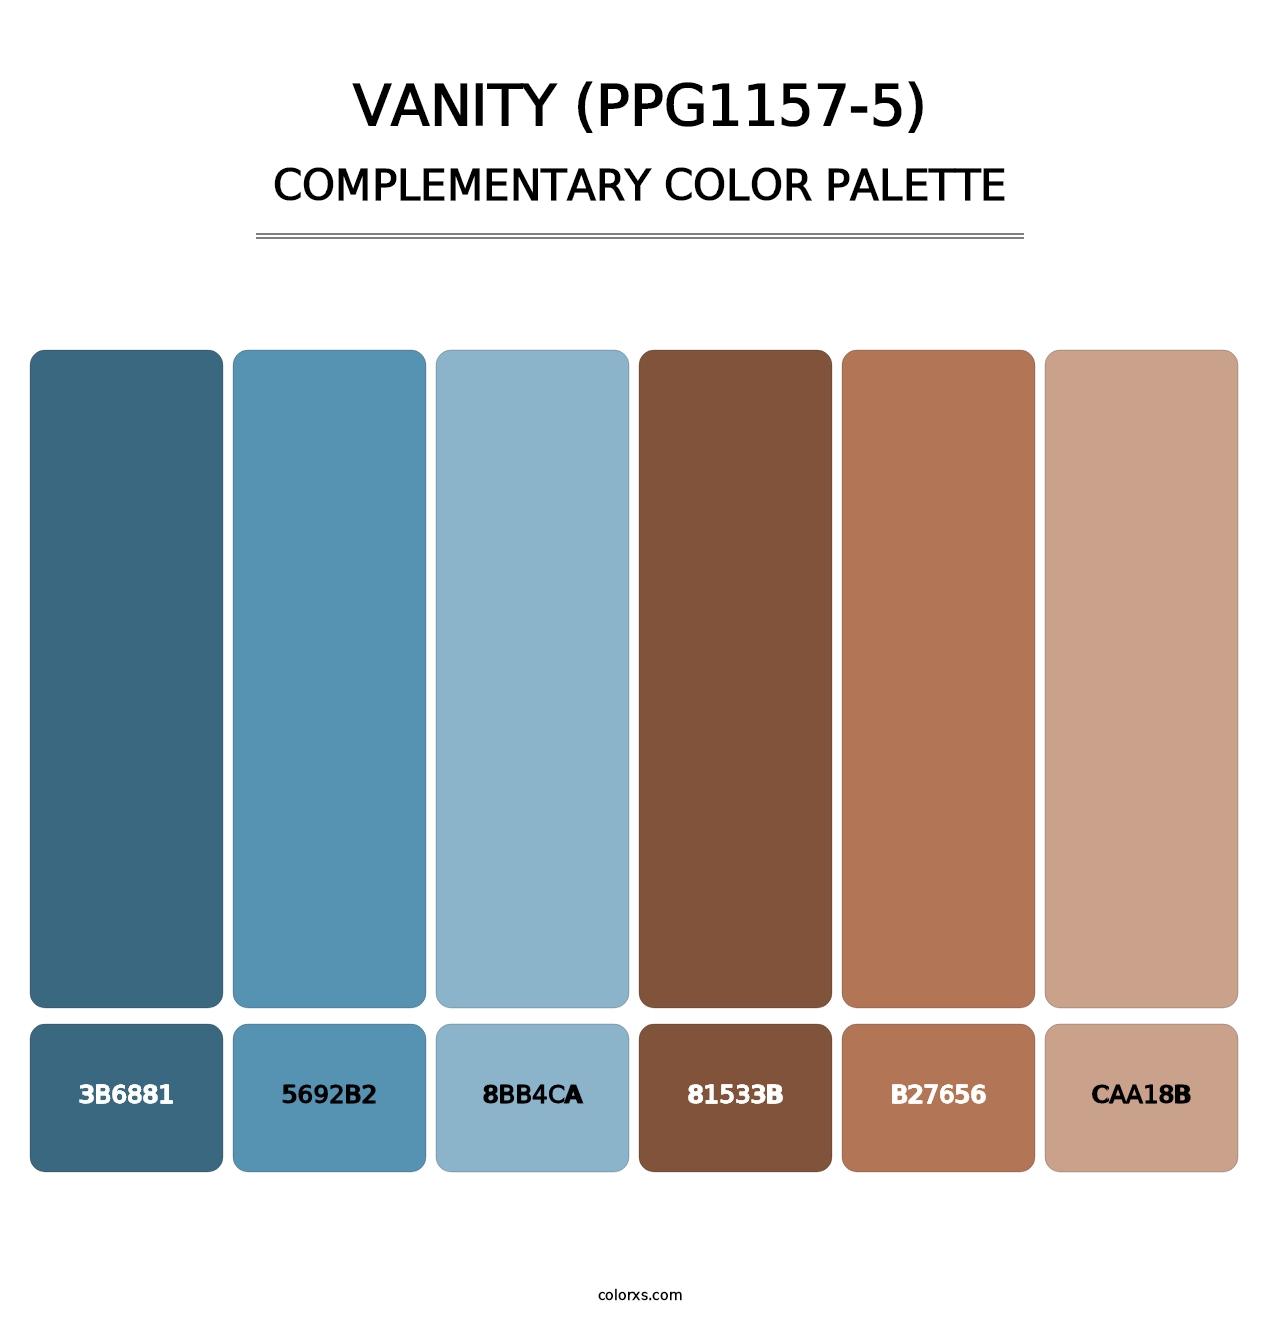 Vanity (PPG1157-5) - Complementary Color Palette